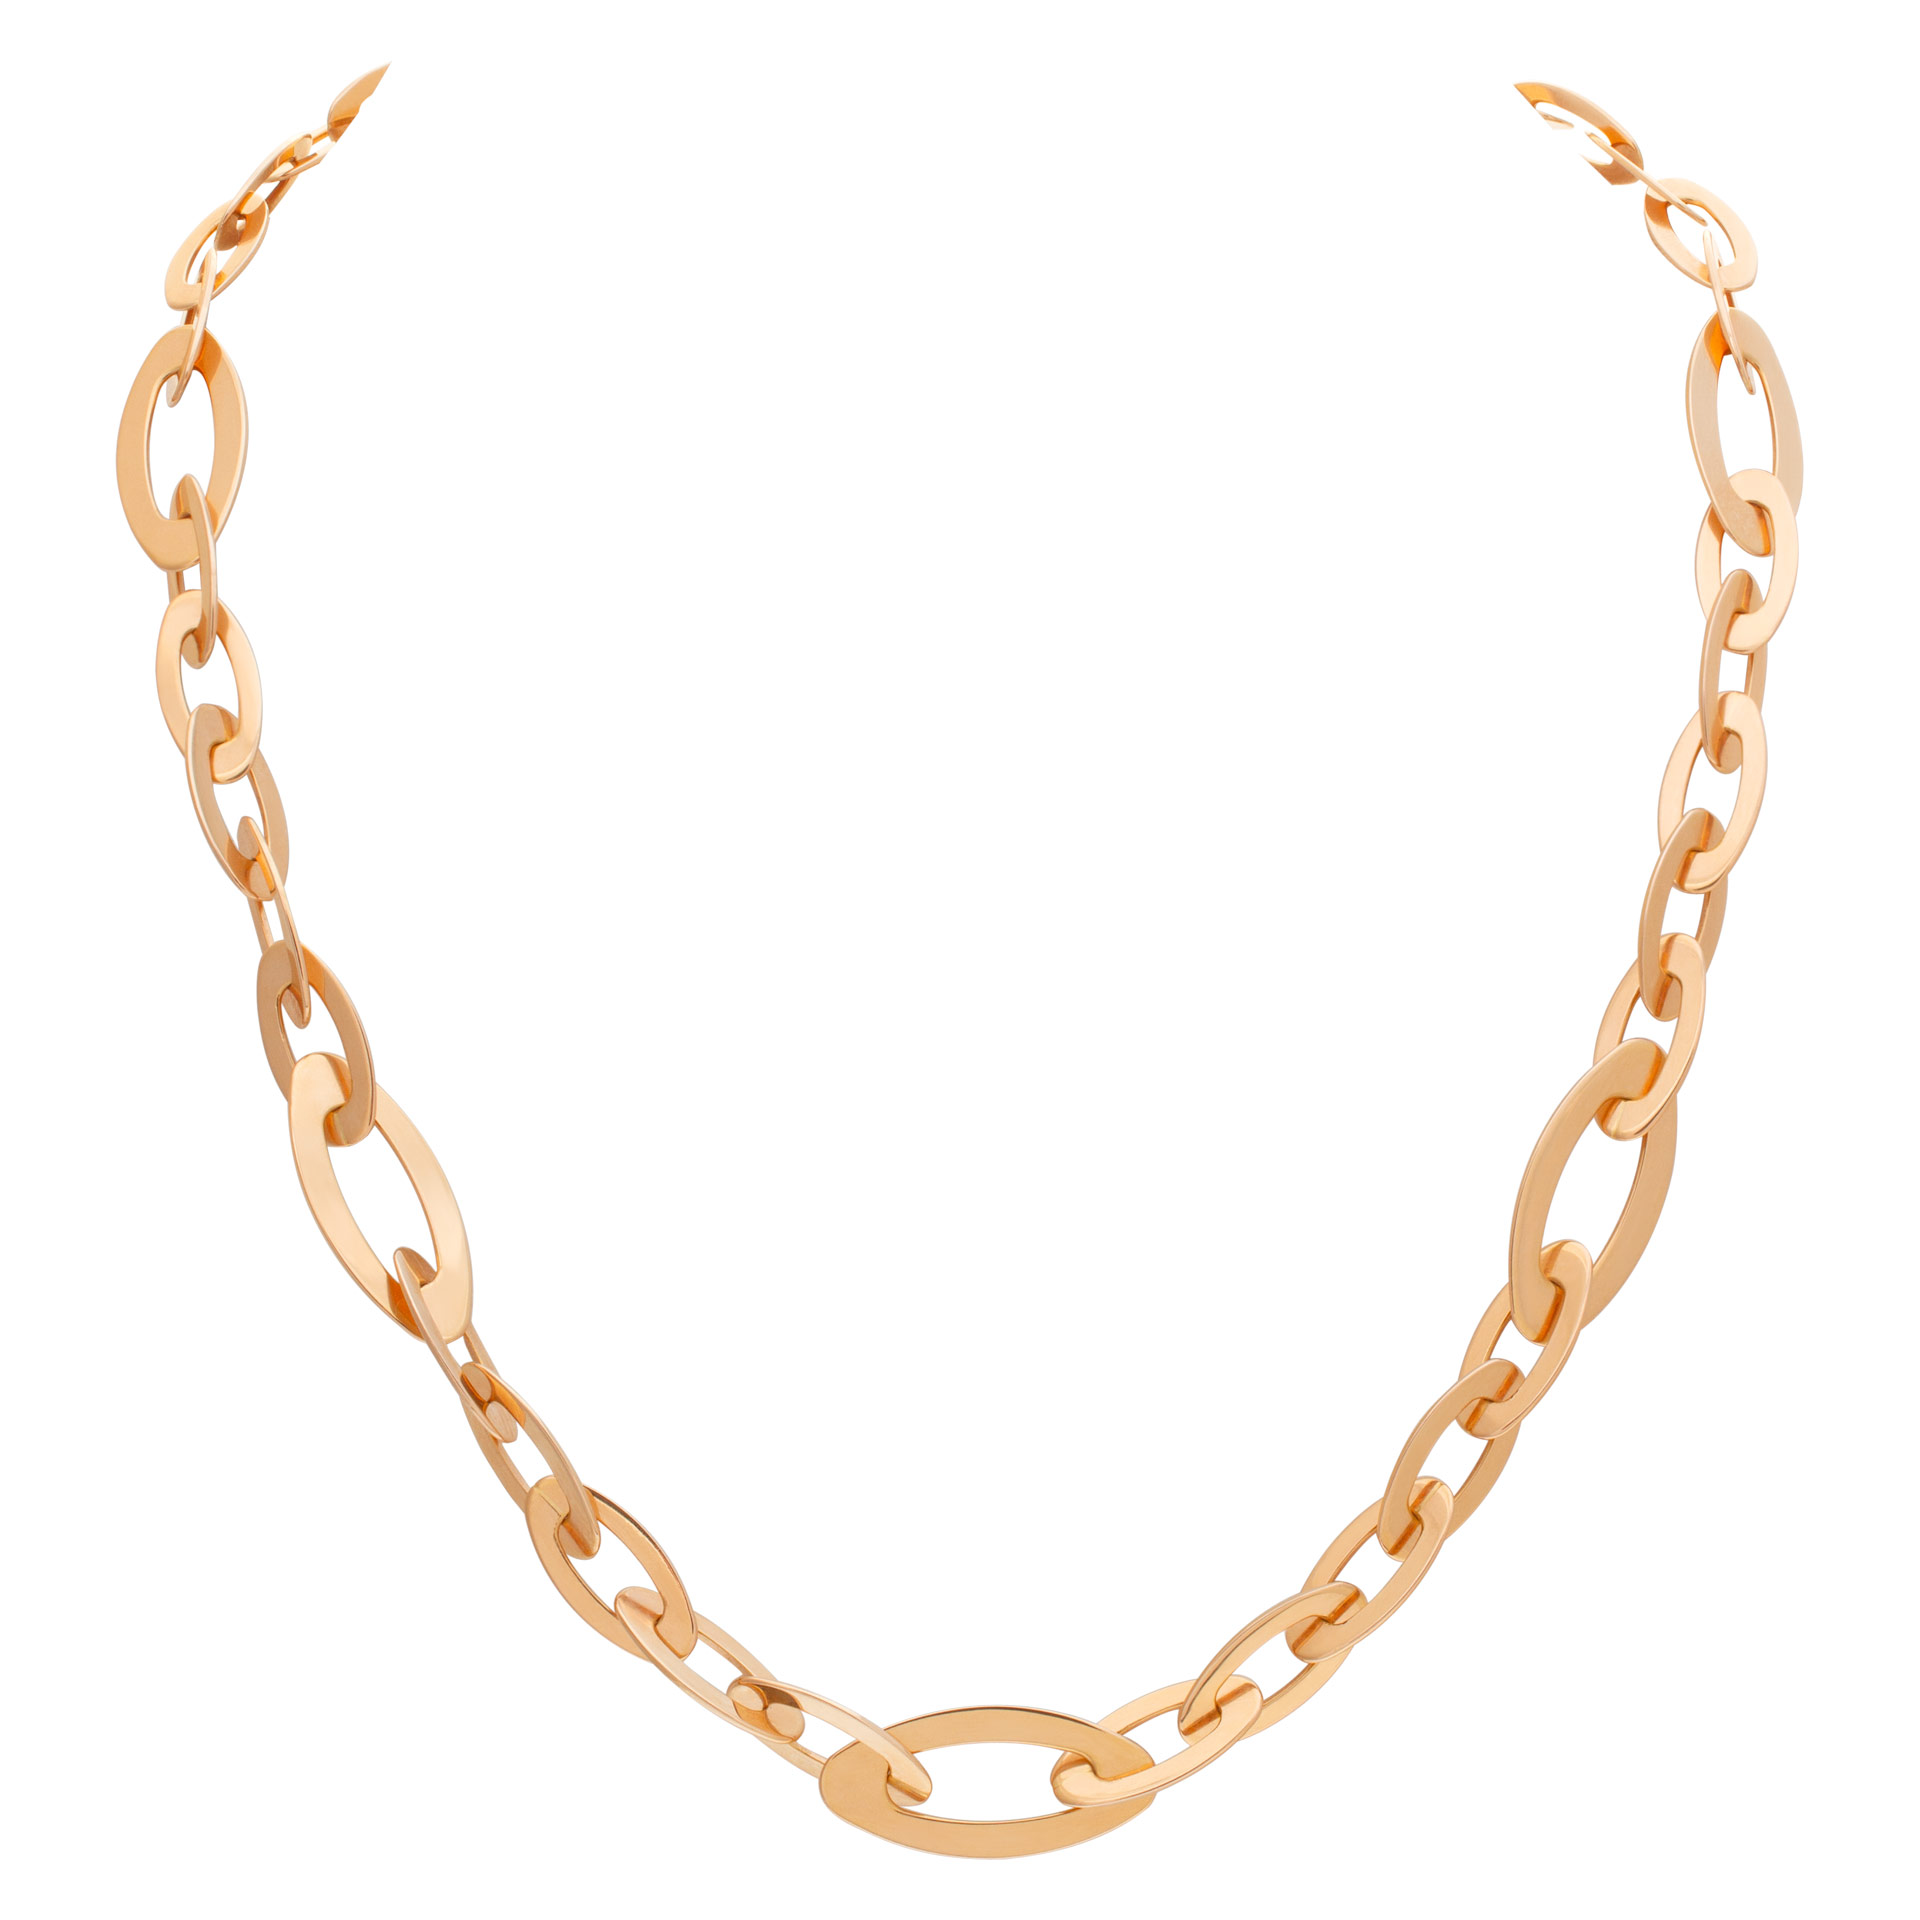 Roberto Coin Italy chic and shine collection oval link necklace in 18k with cabuchon sapphire accents